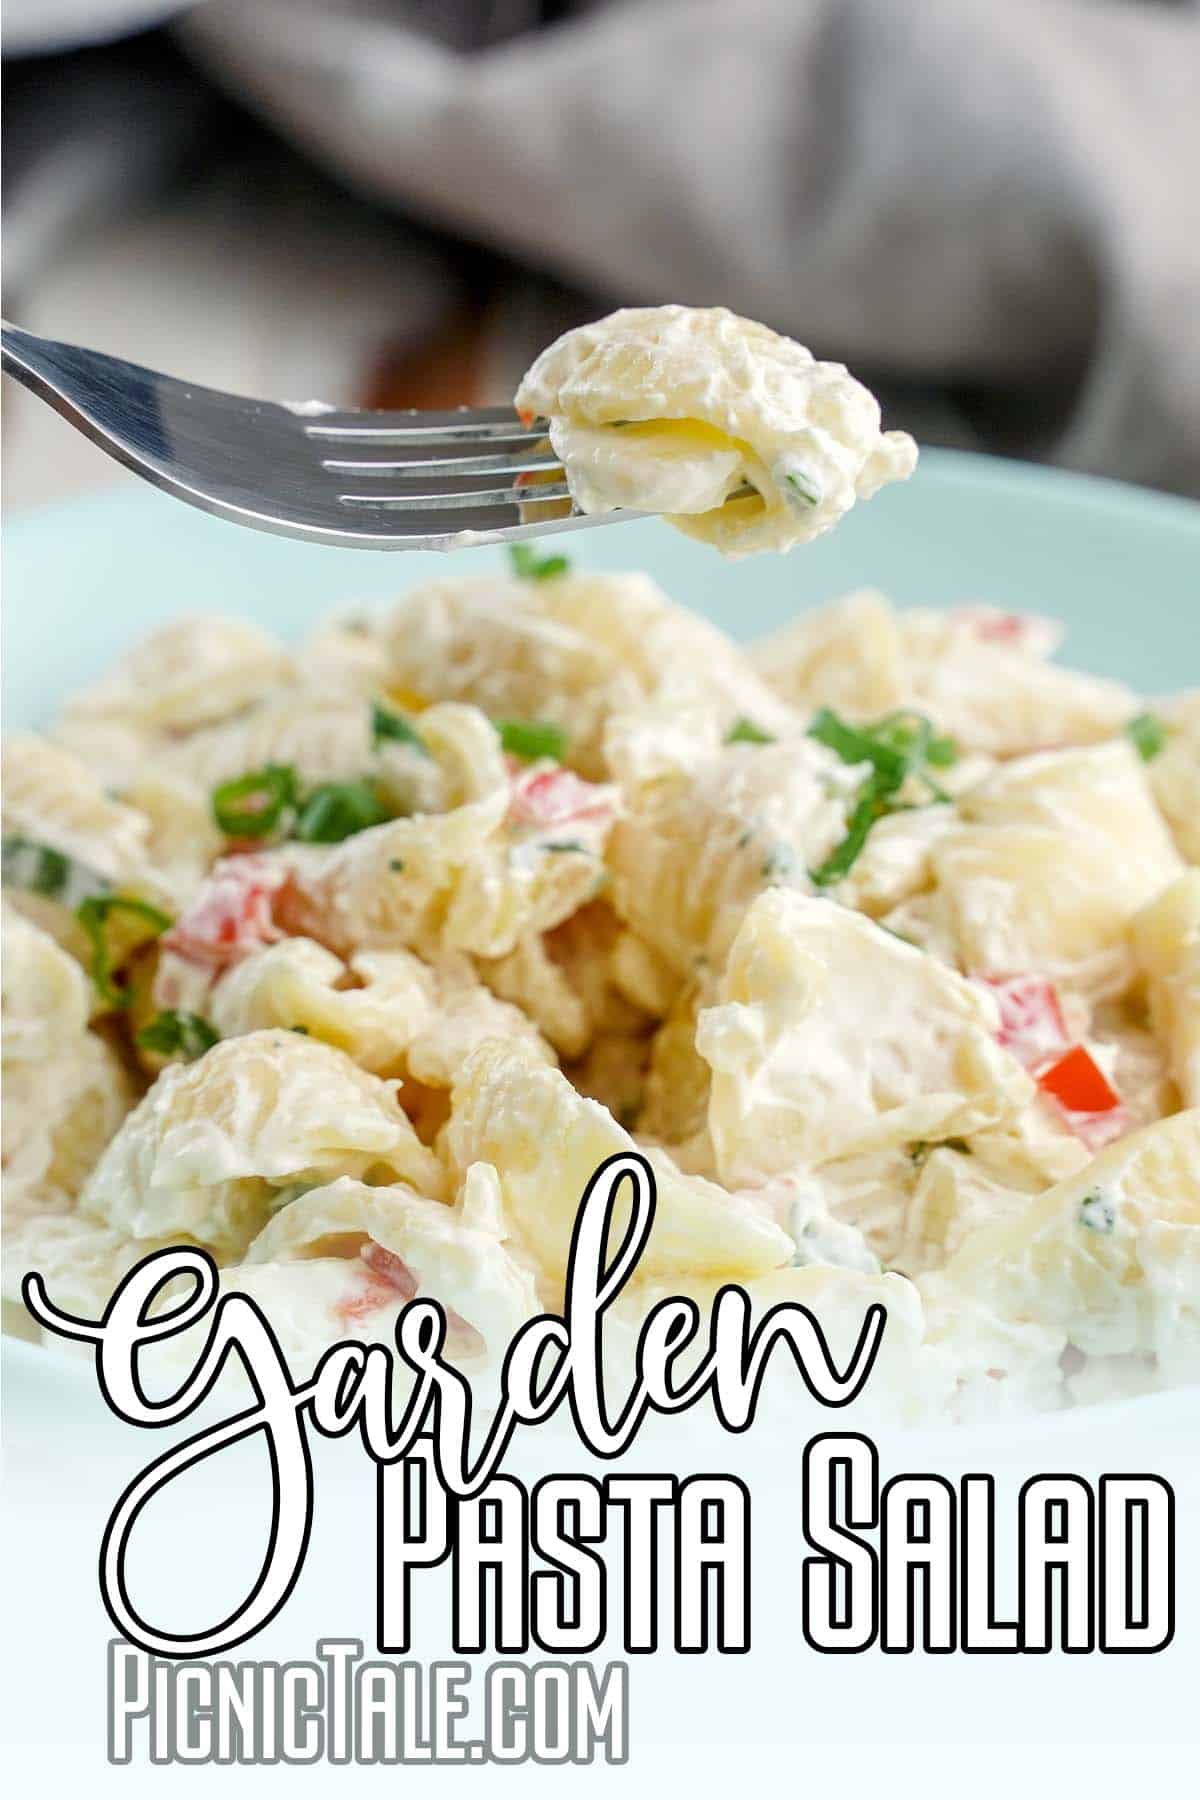 forkful of fresh vegetable pasta salad with text which reads garden pasta salad